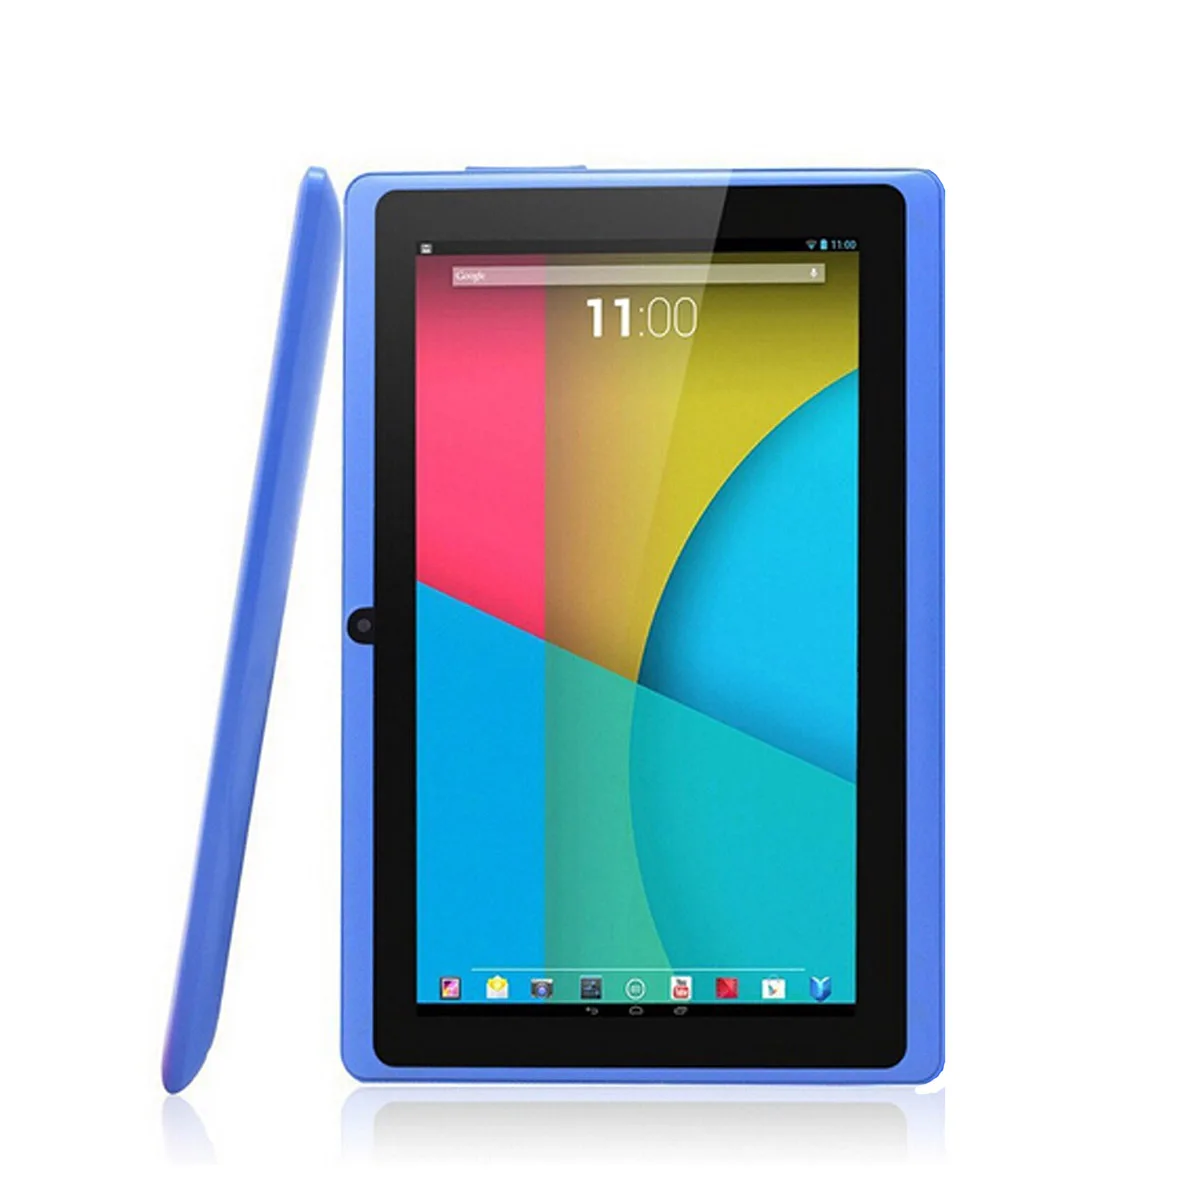 

7-Inch Q8 7 Inch Tablet PC A33 Quad Core Allwinner Android 4.4 KitKat Capacitive 1.5GHz 512MB RAM 4GB ROM WIFI Dual Camera Flash